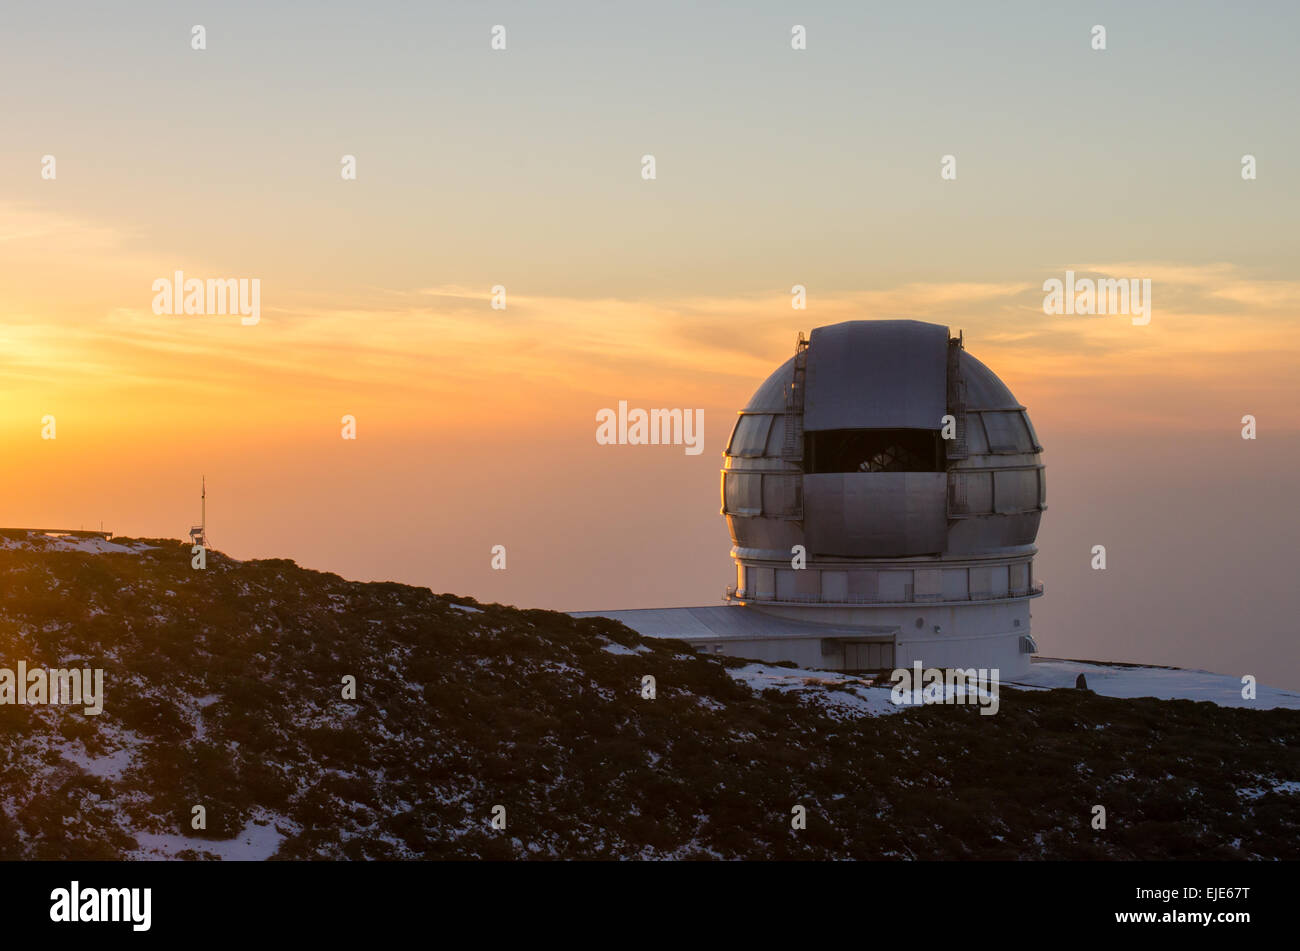 Sunset in the Astrophysical Observatory of the Roque de los Muchachos, La Palma, Canary islands, Spain. Stock Photo